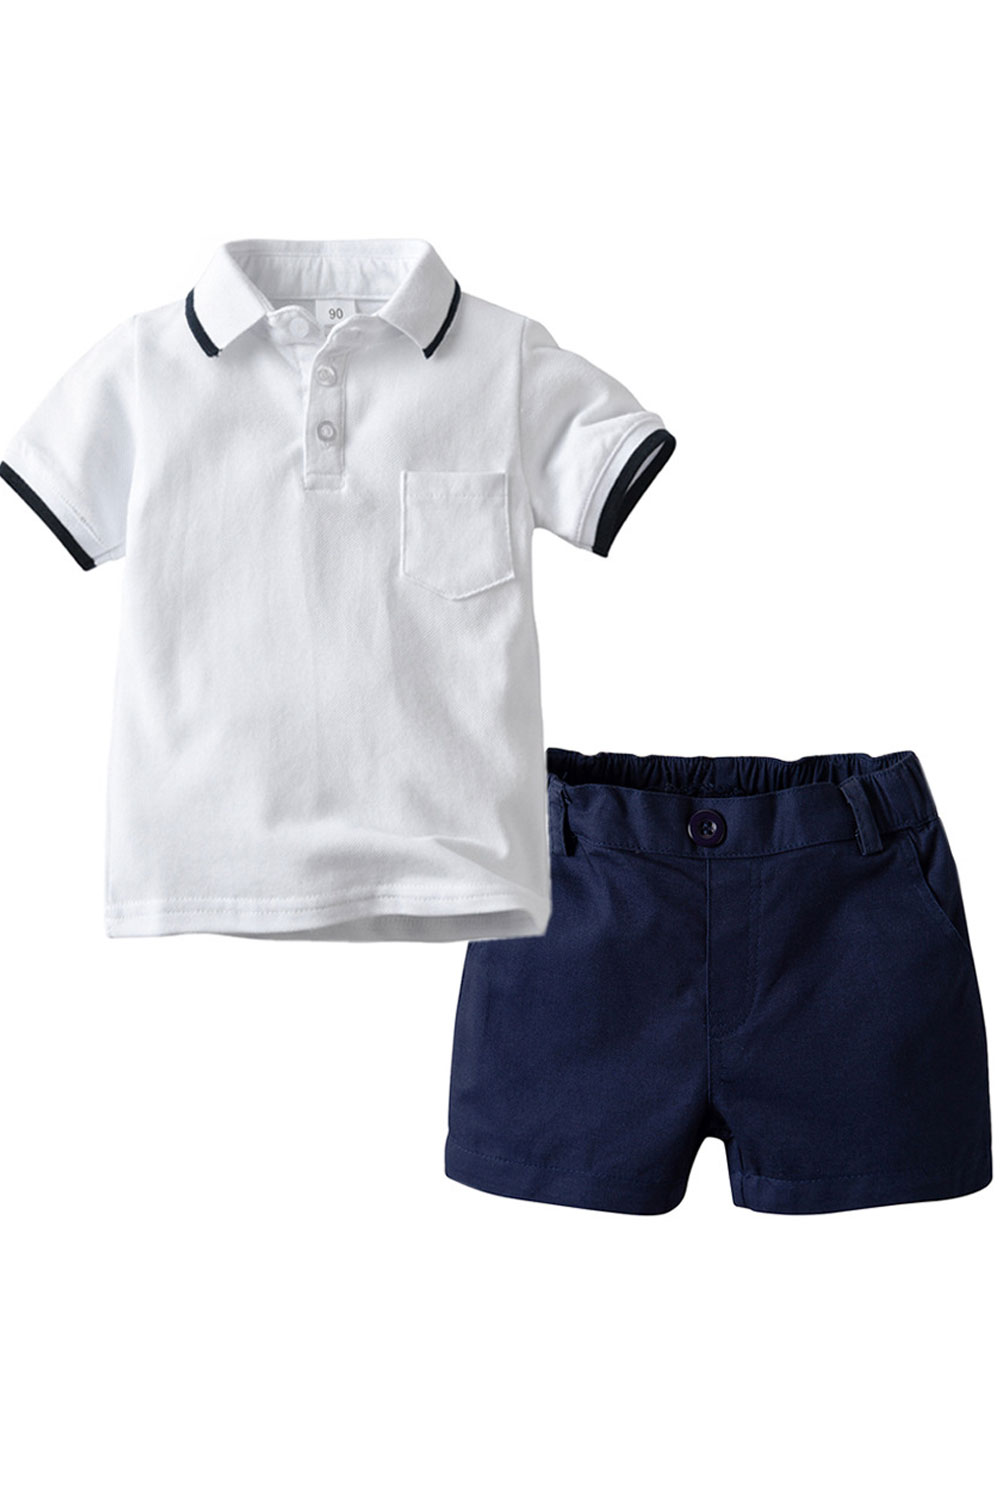 Unomatch Baby Boys Polo Shirt Solid Colored Two Piece Casual Outfit